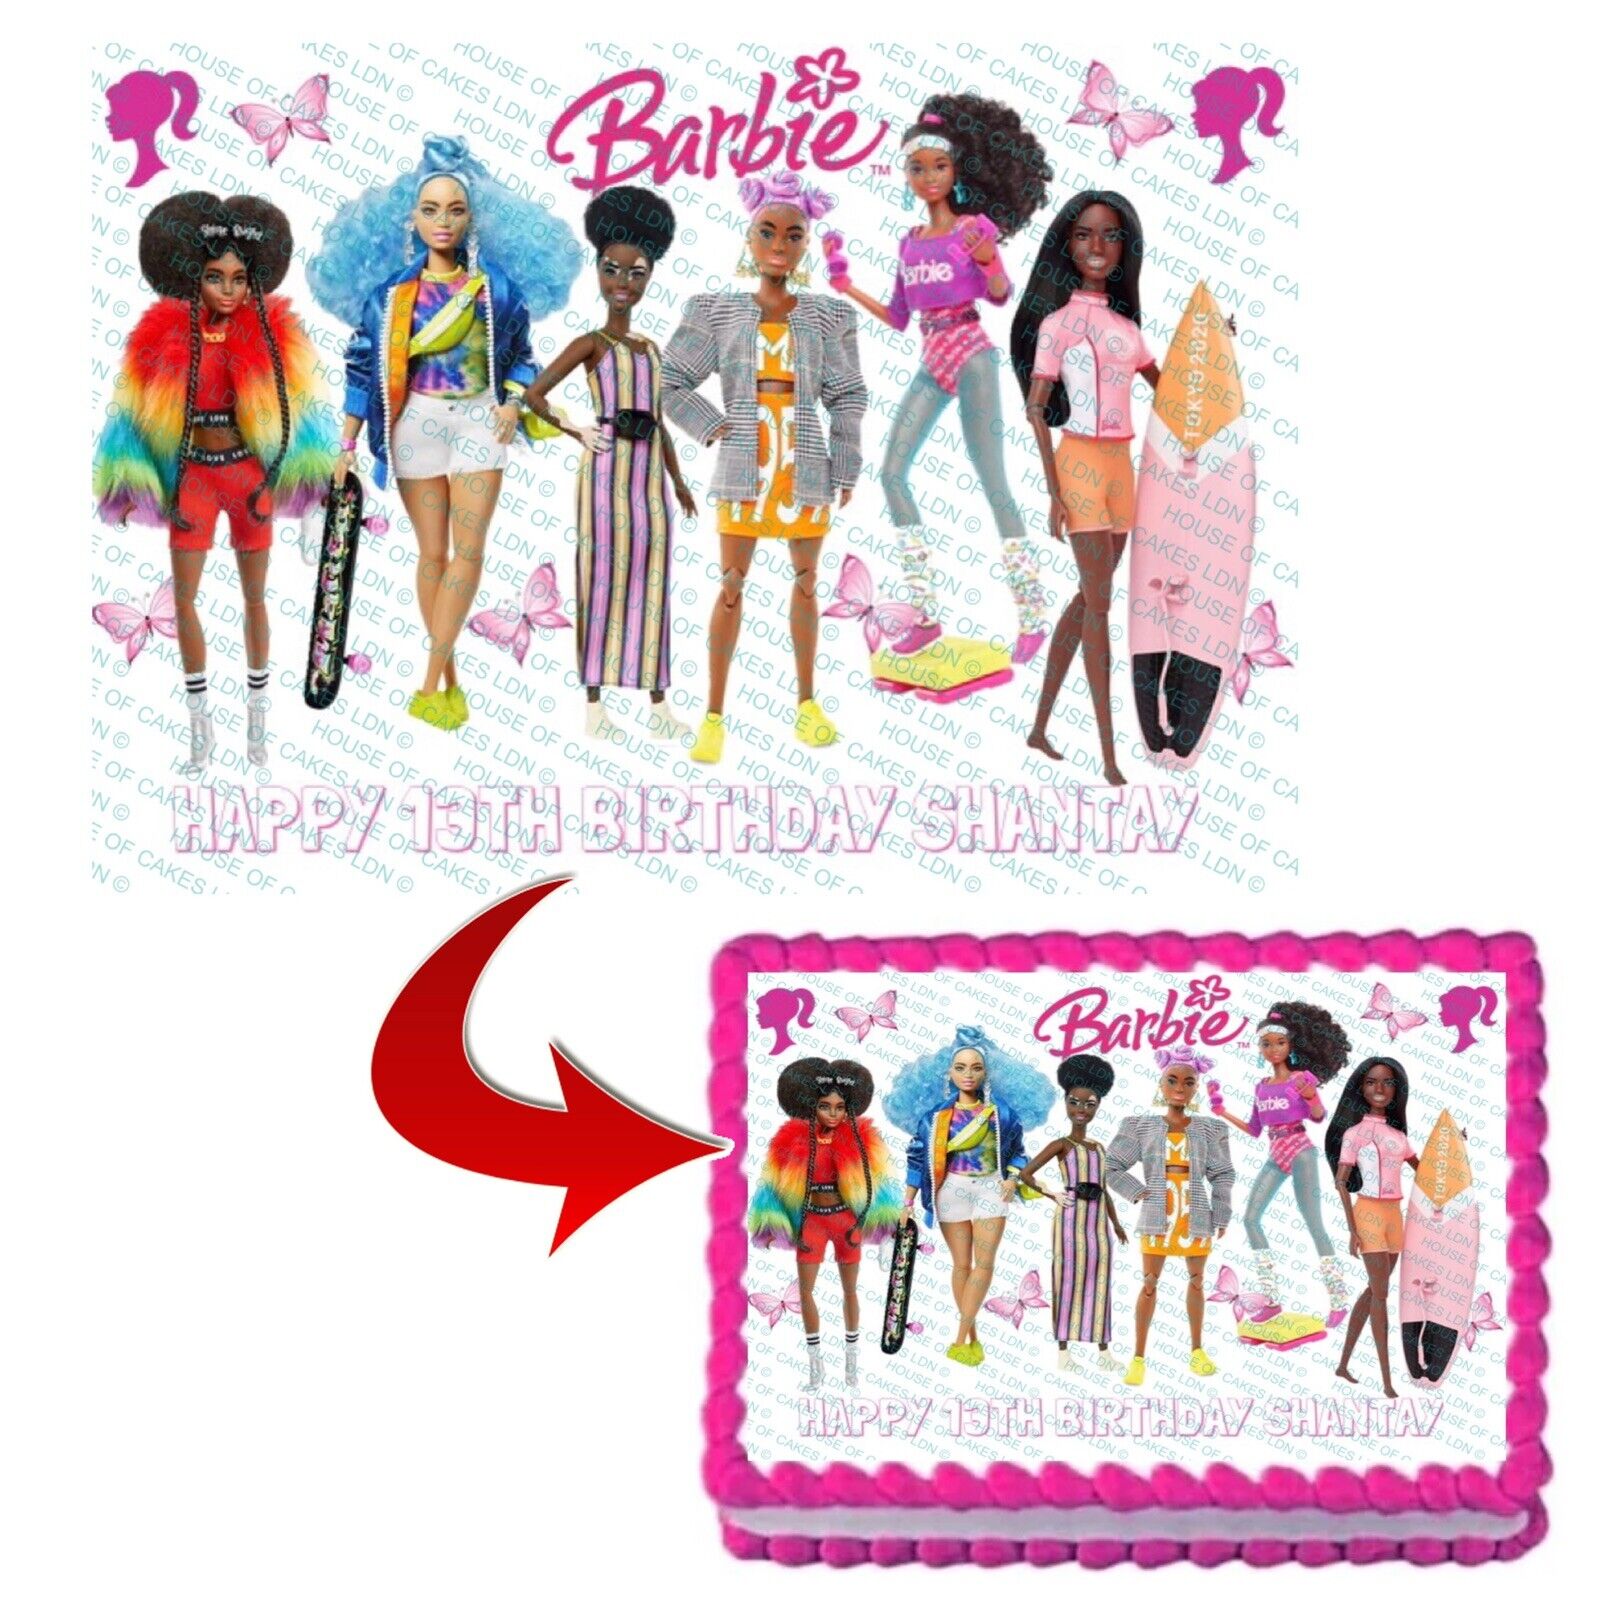 PERSONALISED BARBIE DOLL EDIBLE A4 ICING SHEET BIRTHDAY CAKE TOPPER DECORATION